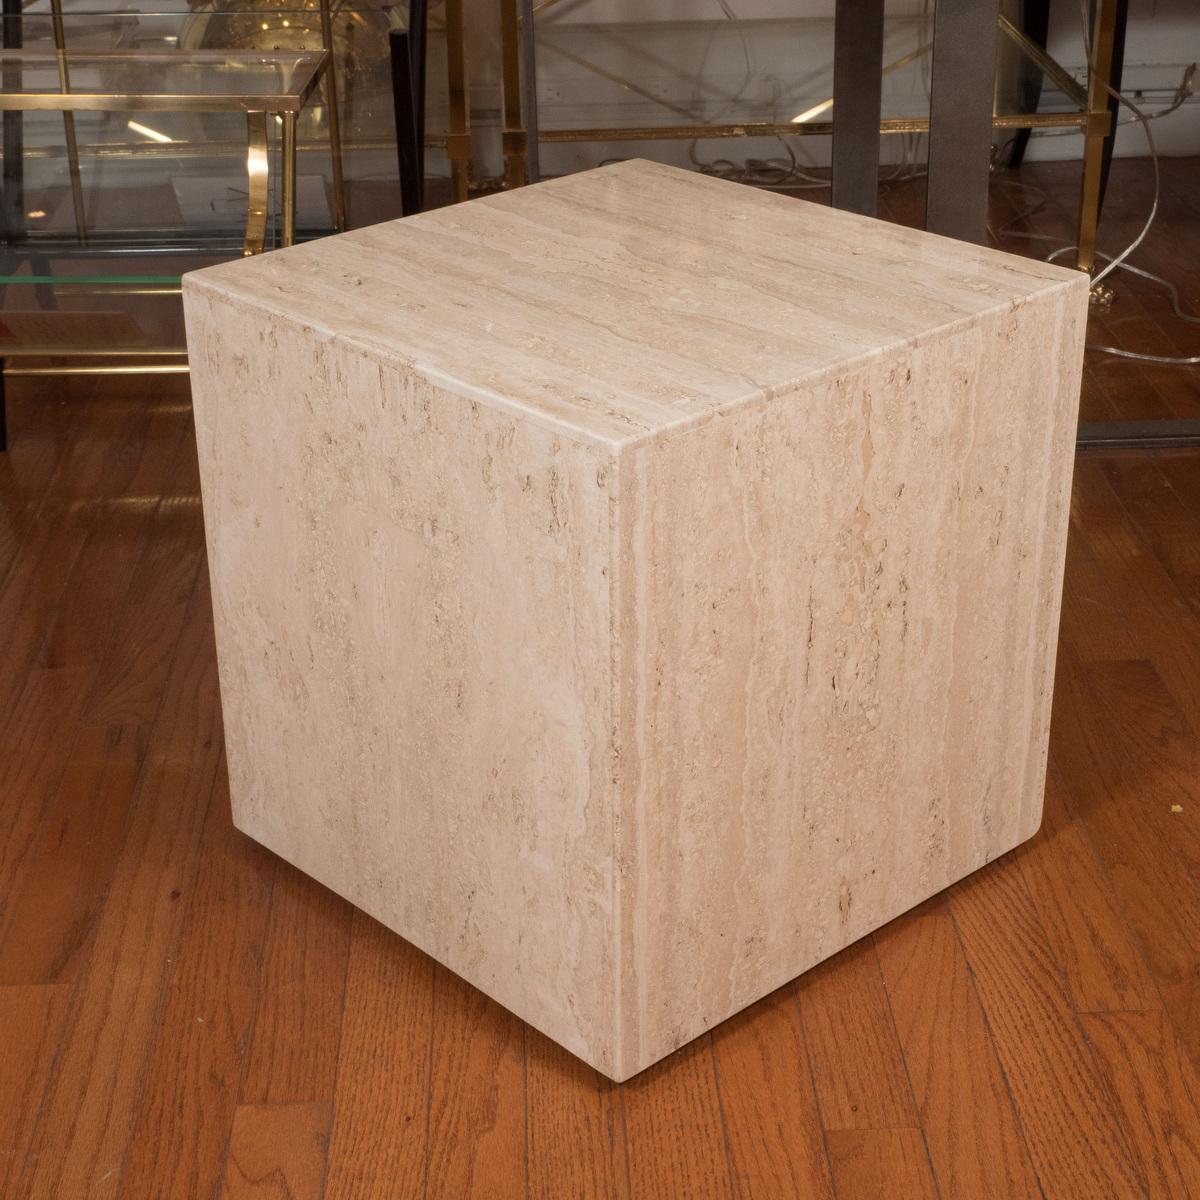 Rolling travertine cube table.

